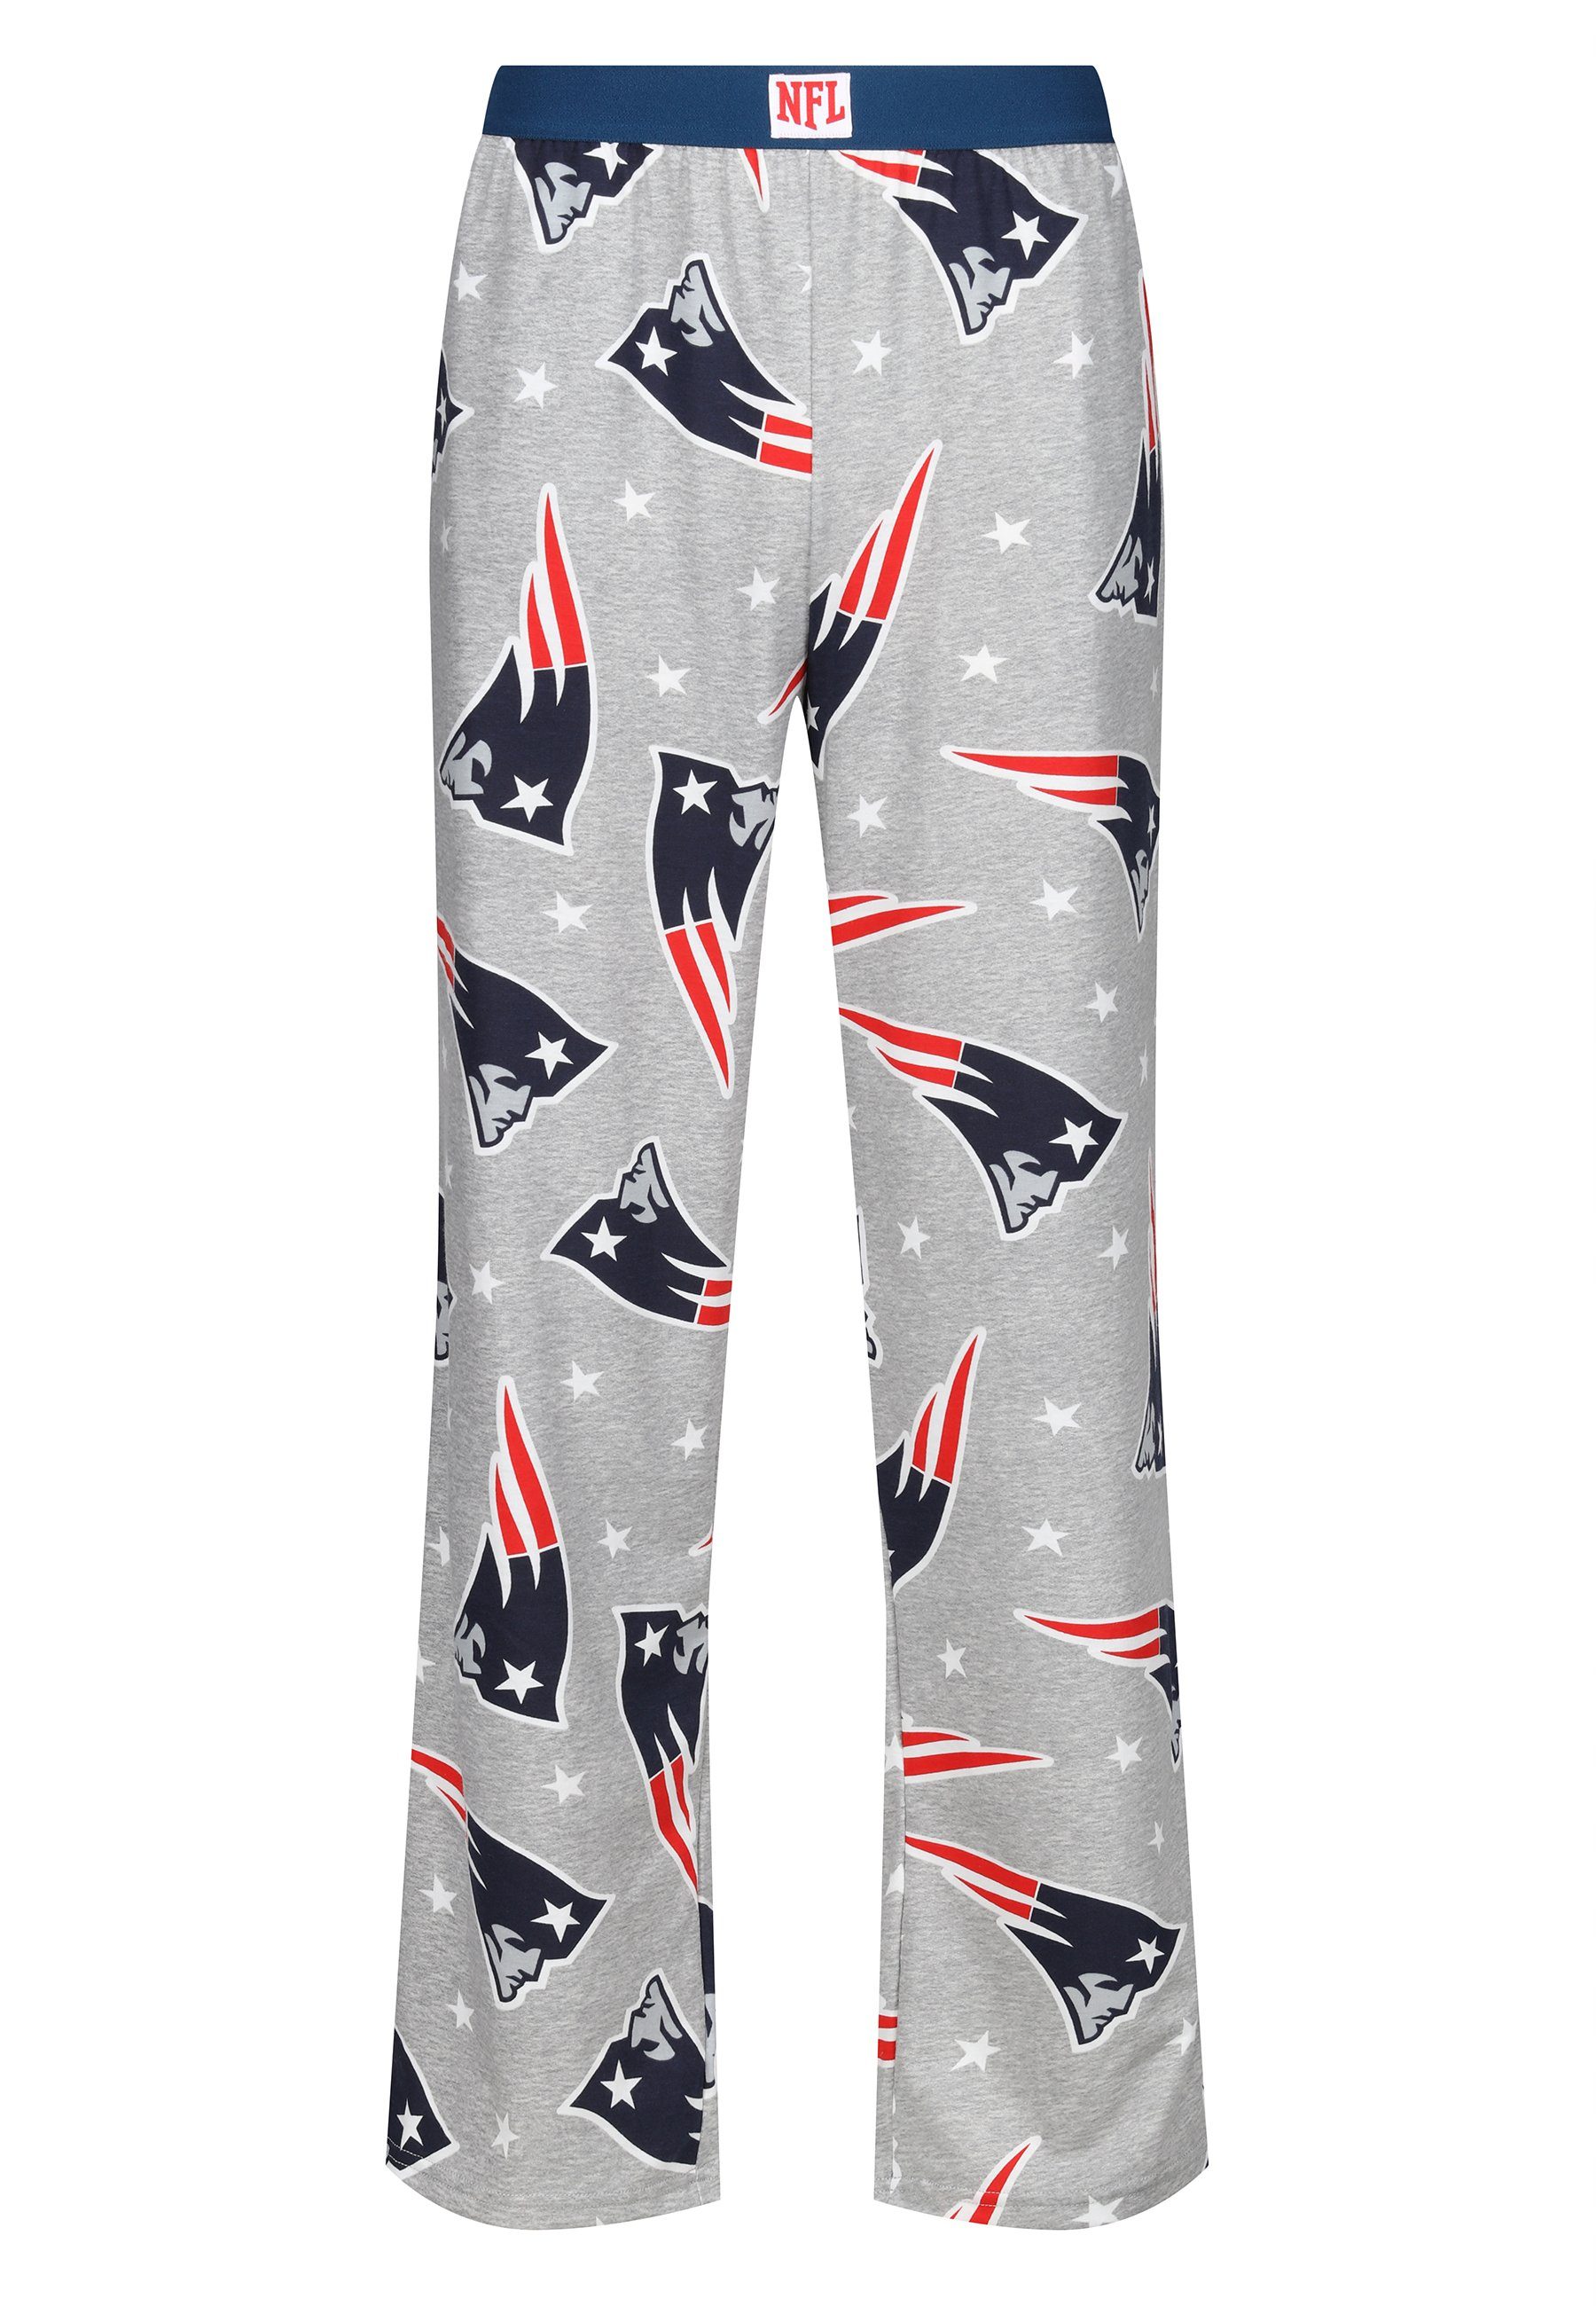 Recovered Loungepants Loungepants New Patriots England Stars NFL and Grey Marl Logo